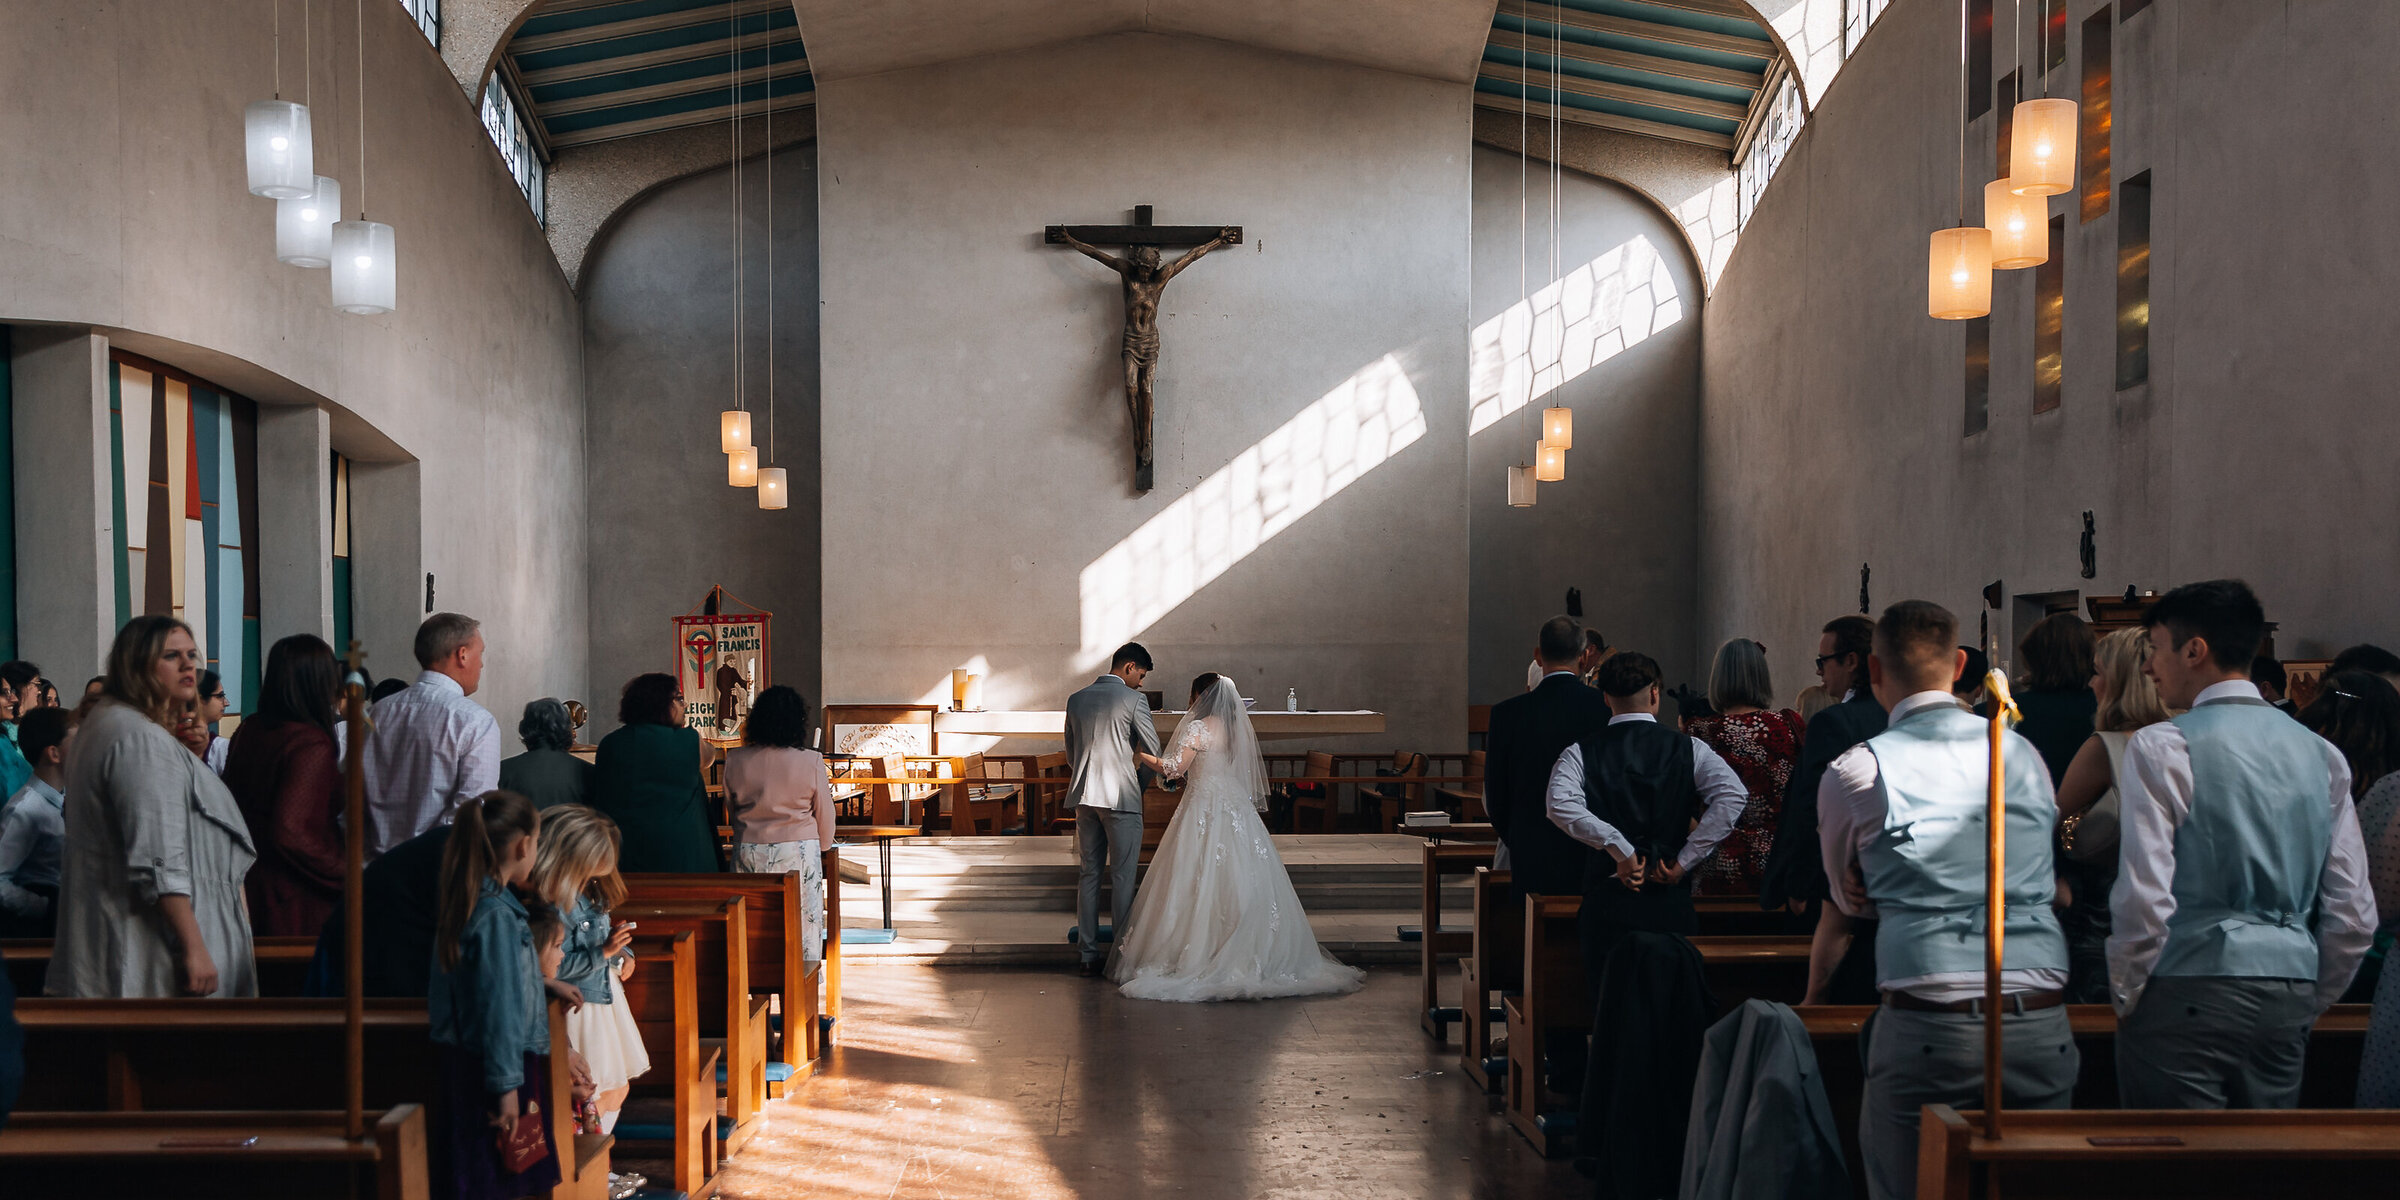 bride and groom at the alter in a large catholic cburch